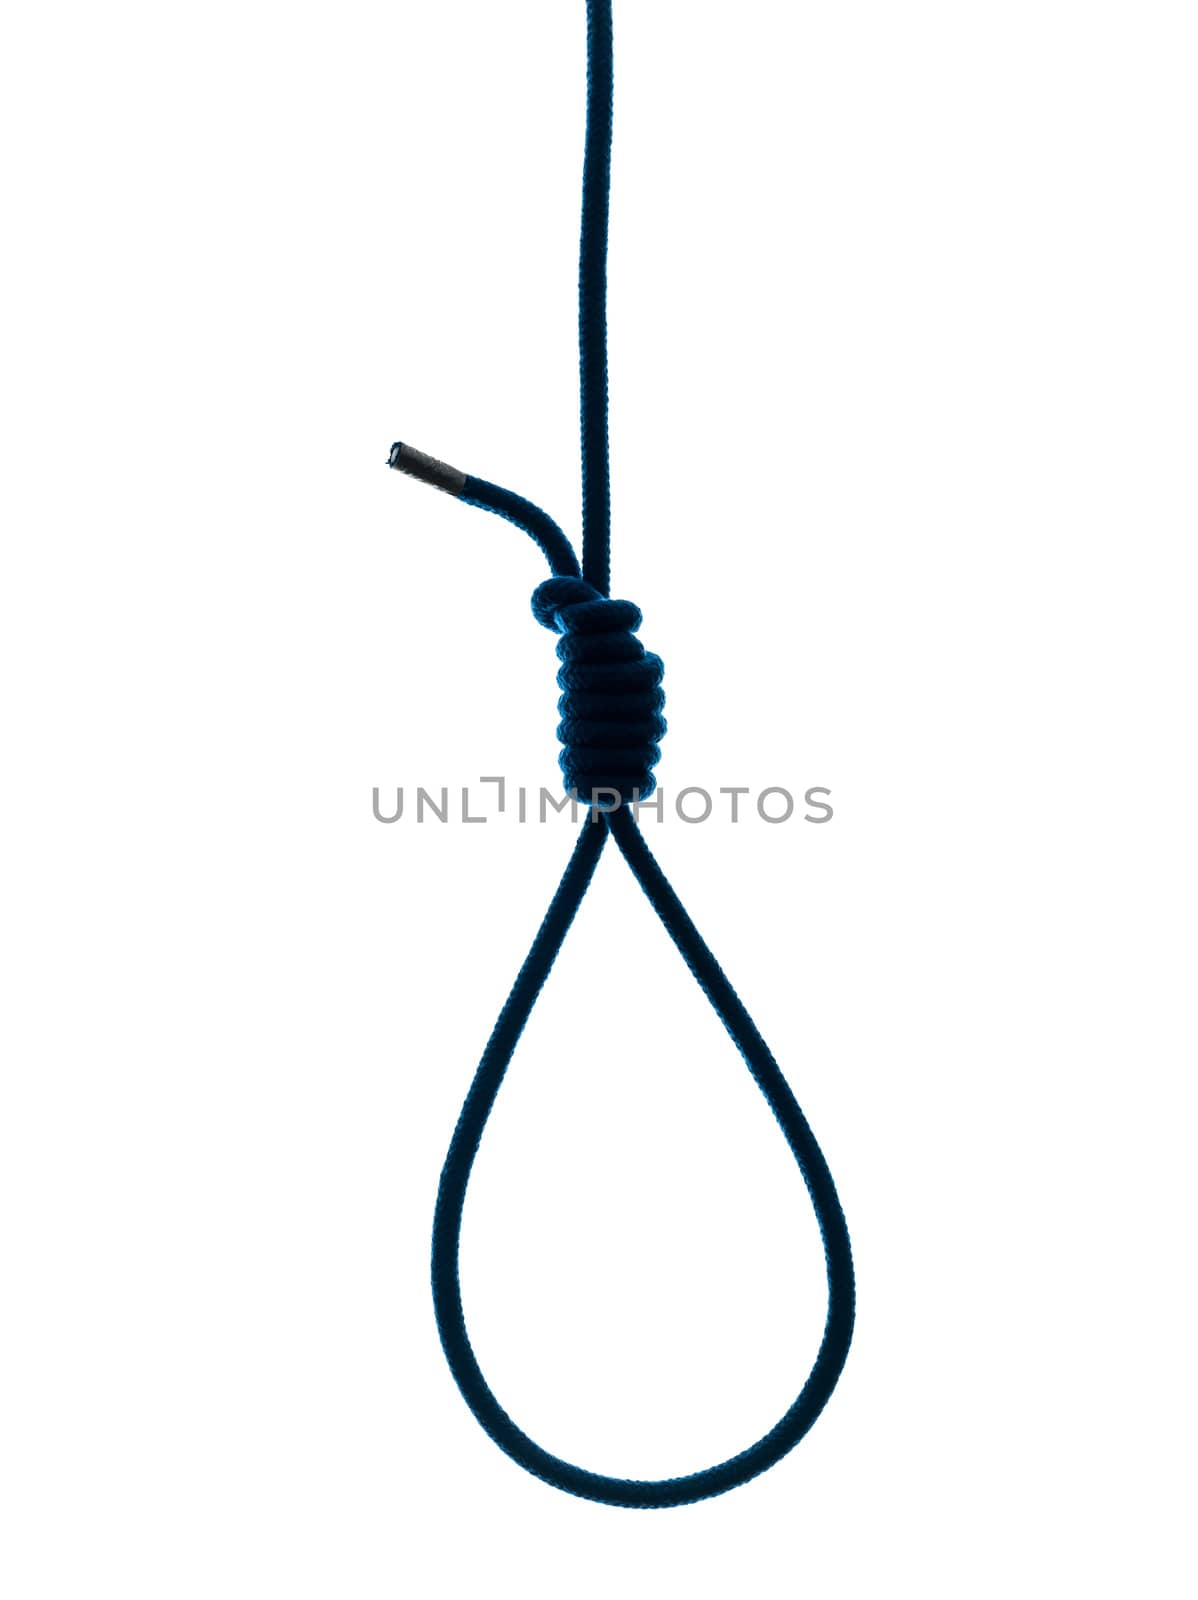 one hangman noose silhouette in silhouette studio isolated on white background